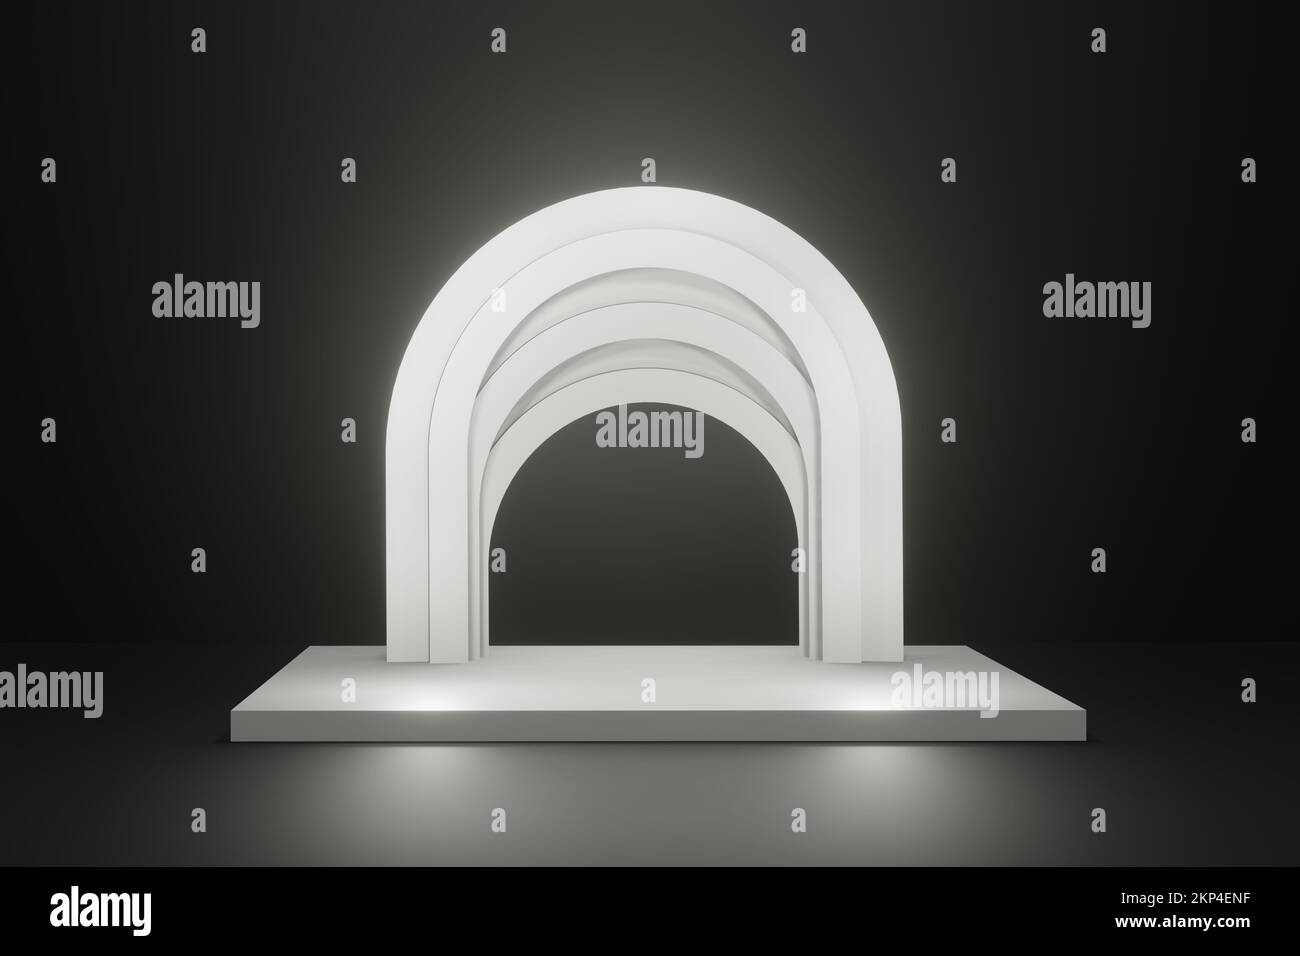 empty stage podium with white shining arch on dark background, paradise arch scene 3d render. Stock Photo